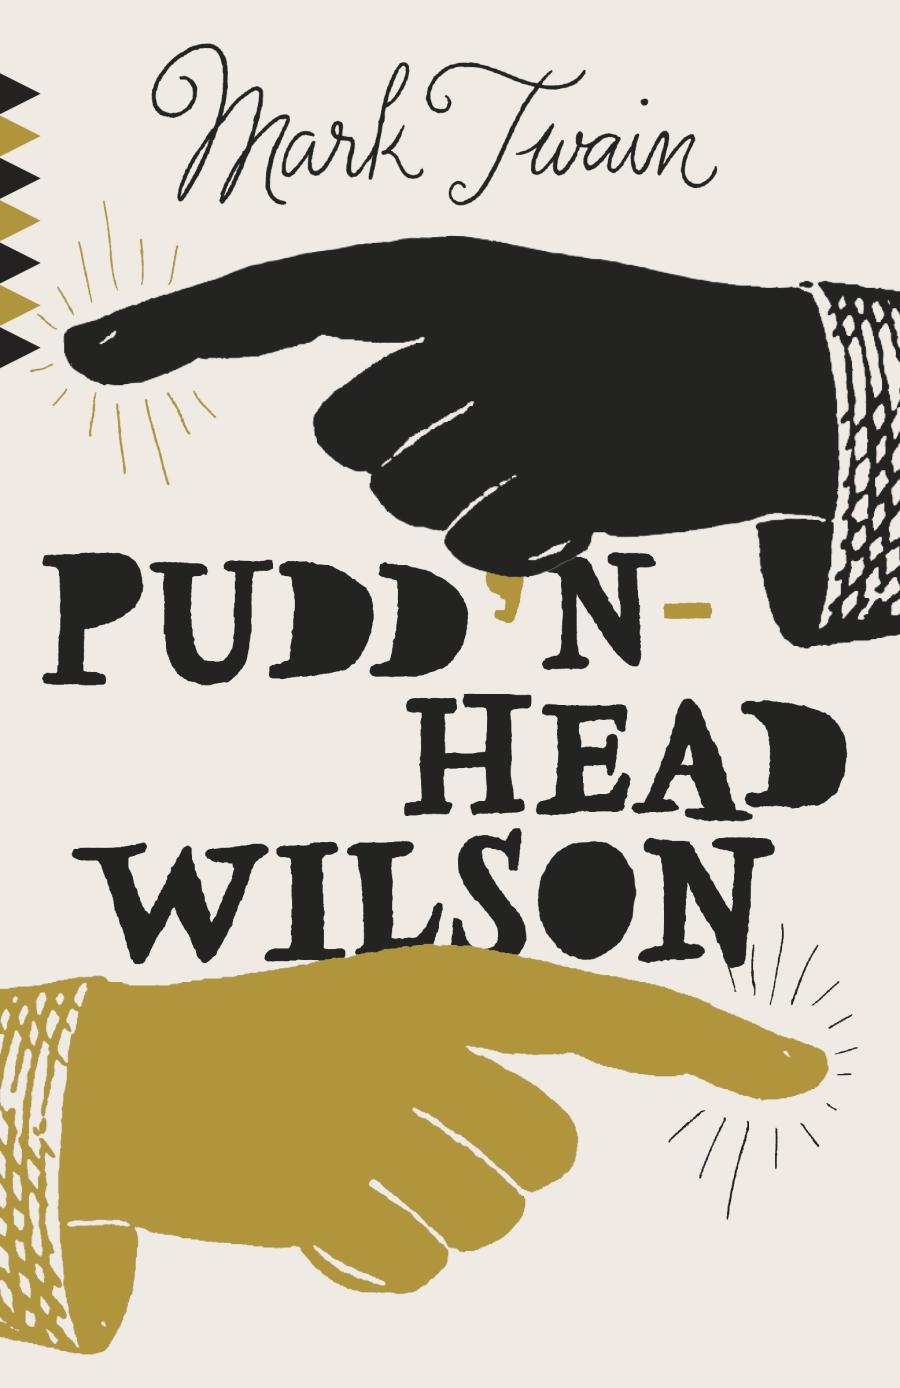 Pudd'nhead Wilson book cover illustration of a black hand pointing left and a gold hand pointing right